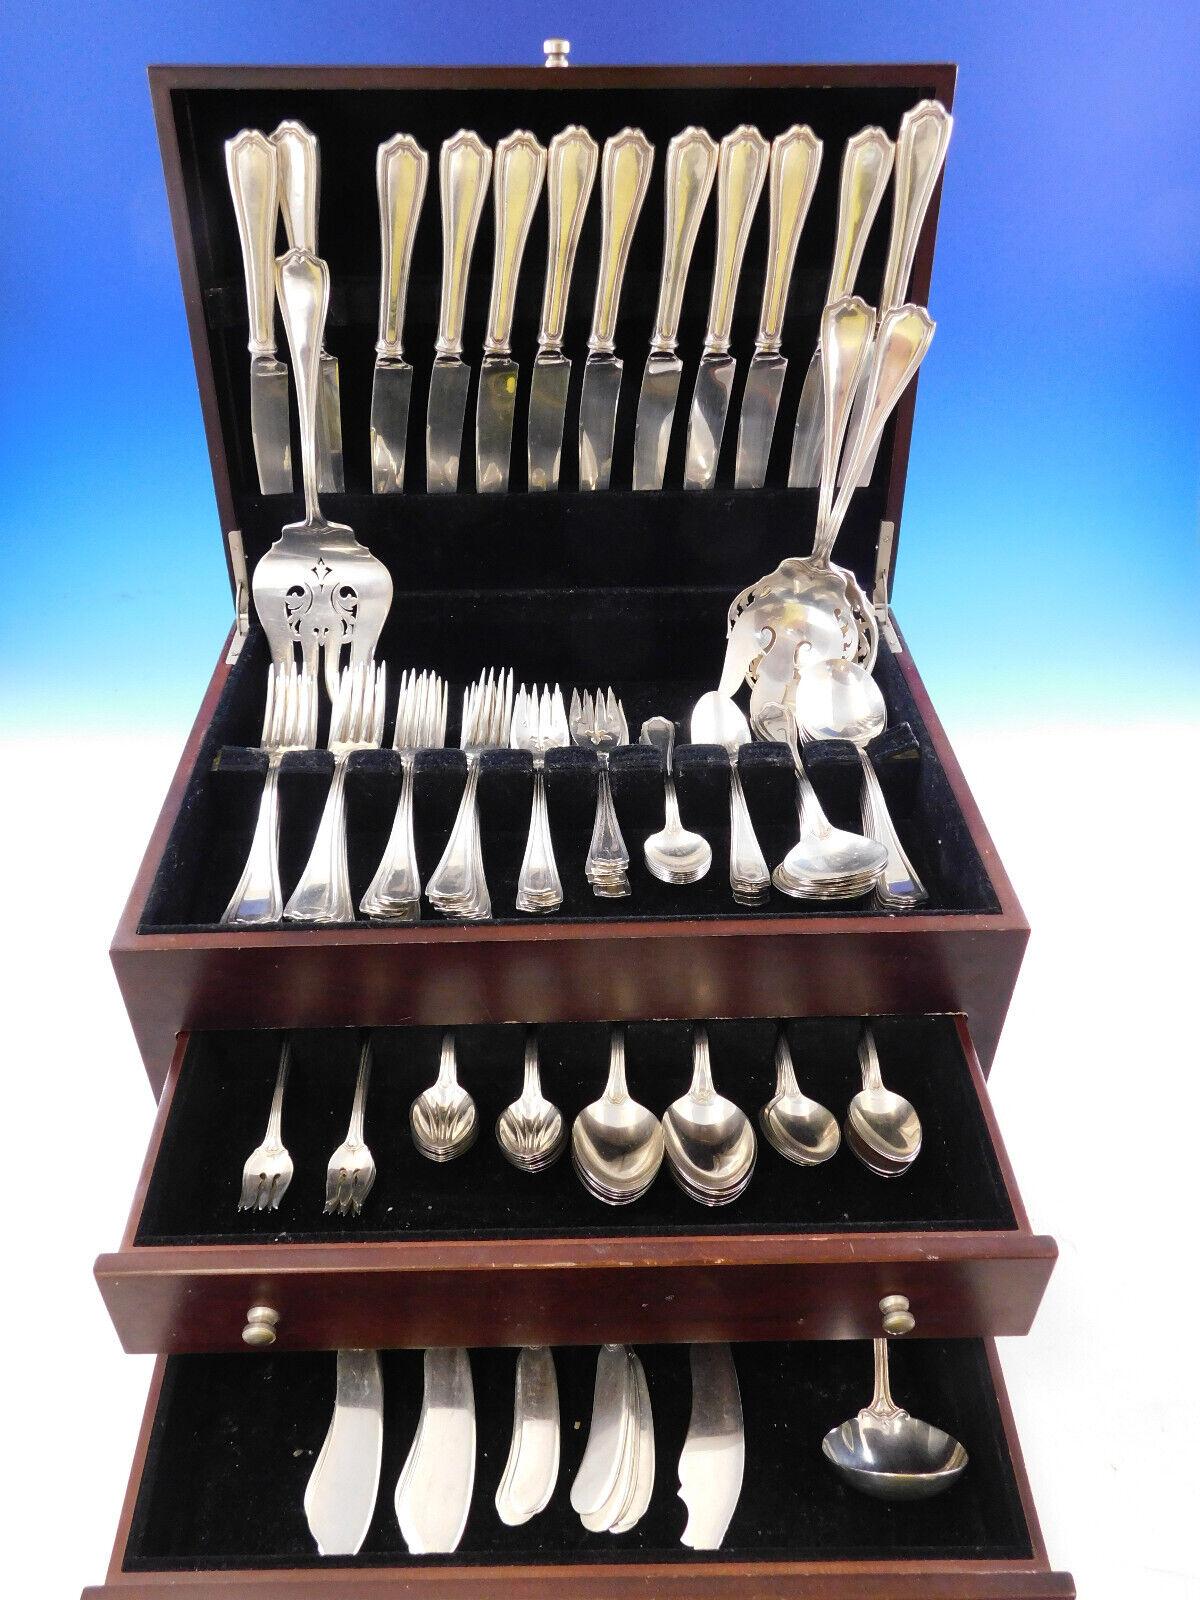 Superb monumental Dinner Size Hepplewhite by Reed & Barton sterling silver flatware set, 149 pieces. This tailored, timeless pattern is a best seller. This set includes:

12 Dinner size knives, 9 5/8